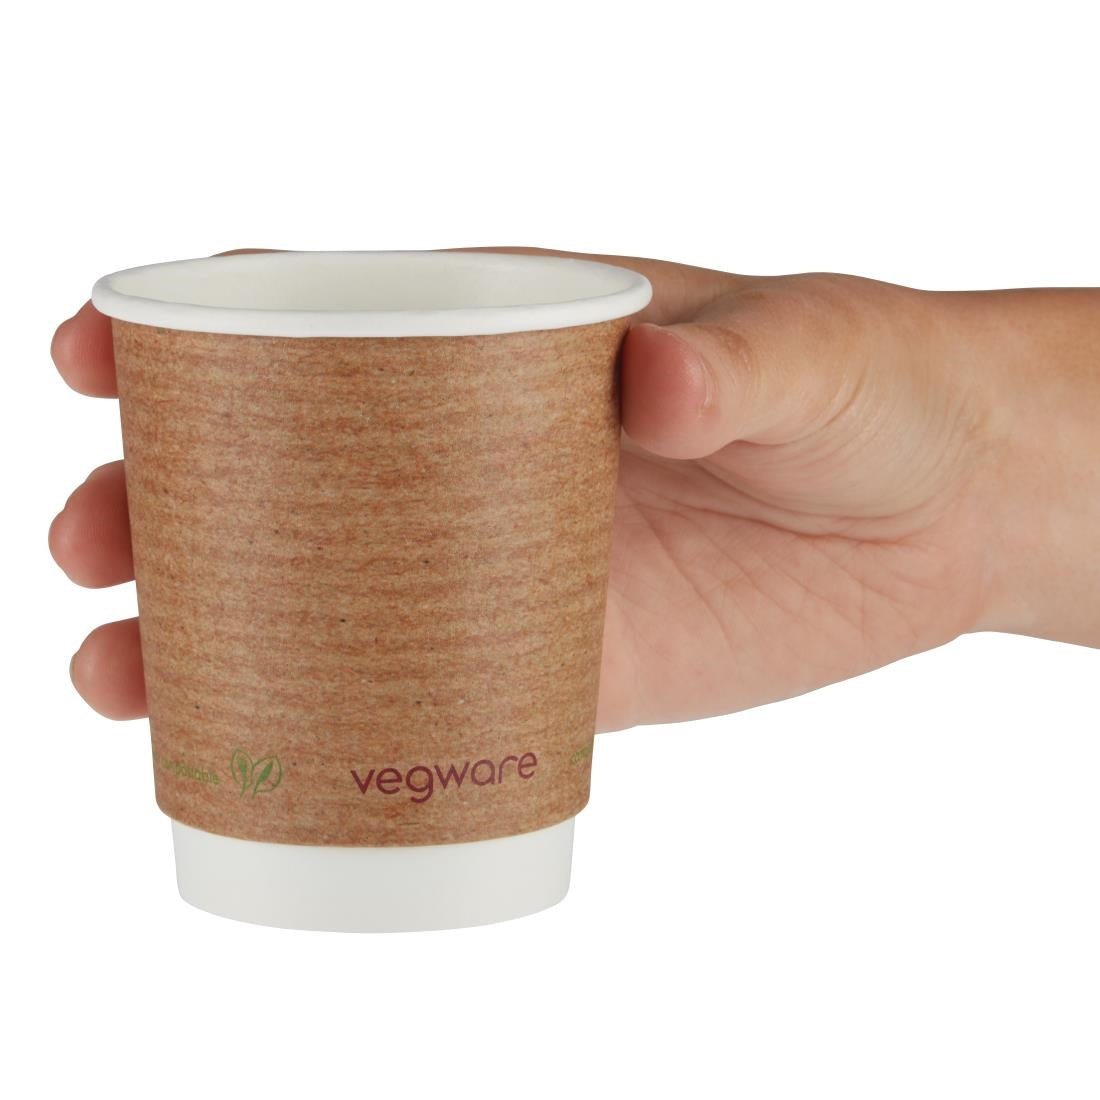 GH020 Vegware Compostable Coffee Cups Double Wall 230ml / 8oz (Pack of 500) JD Catering Equipment Solutions Ltd